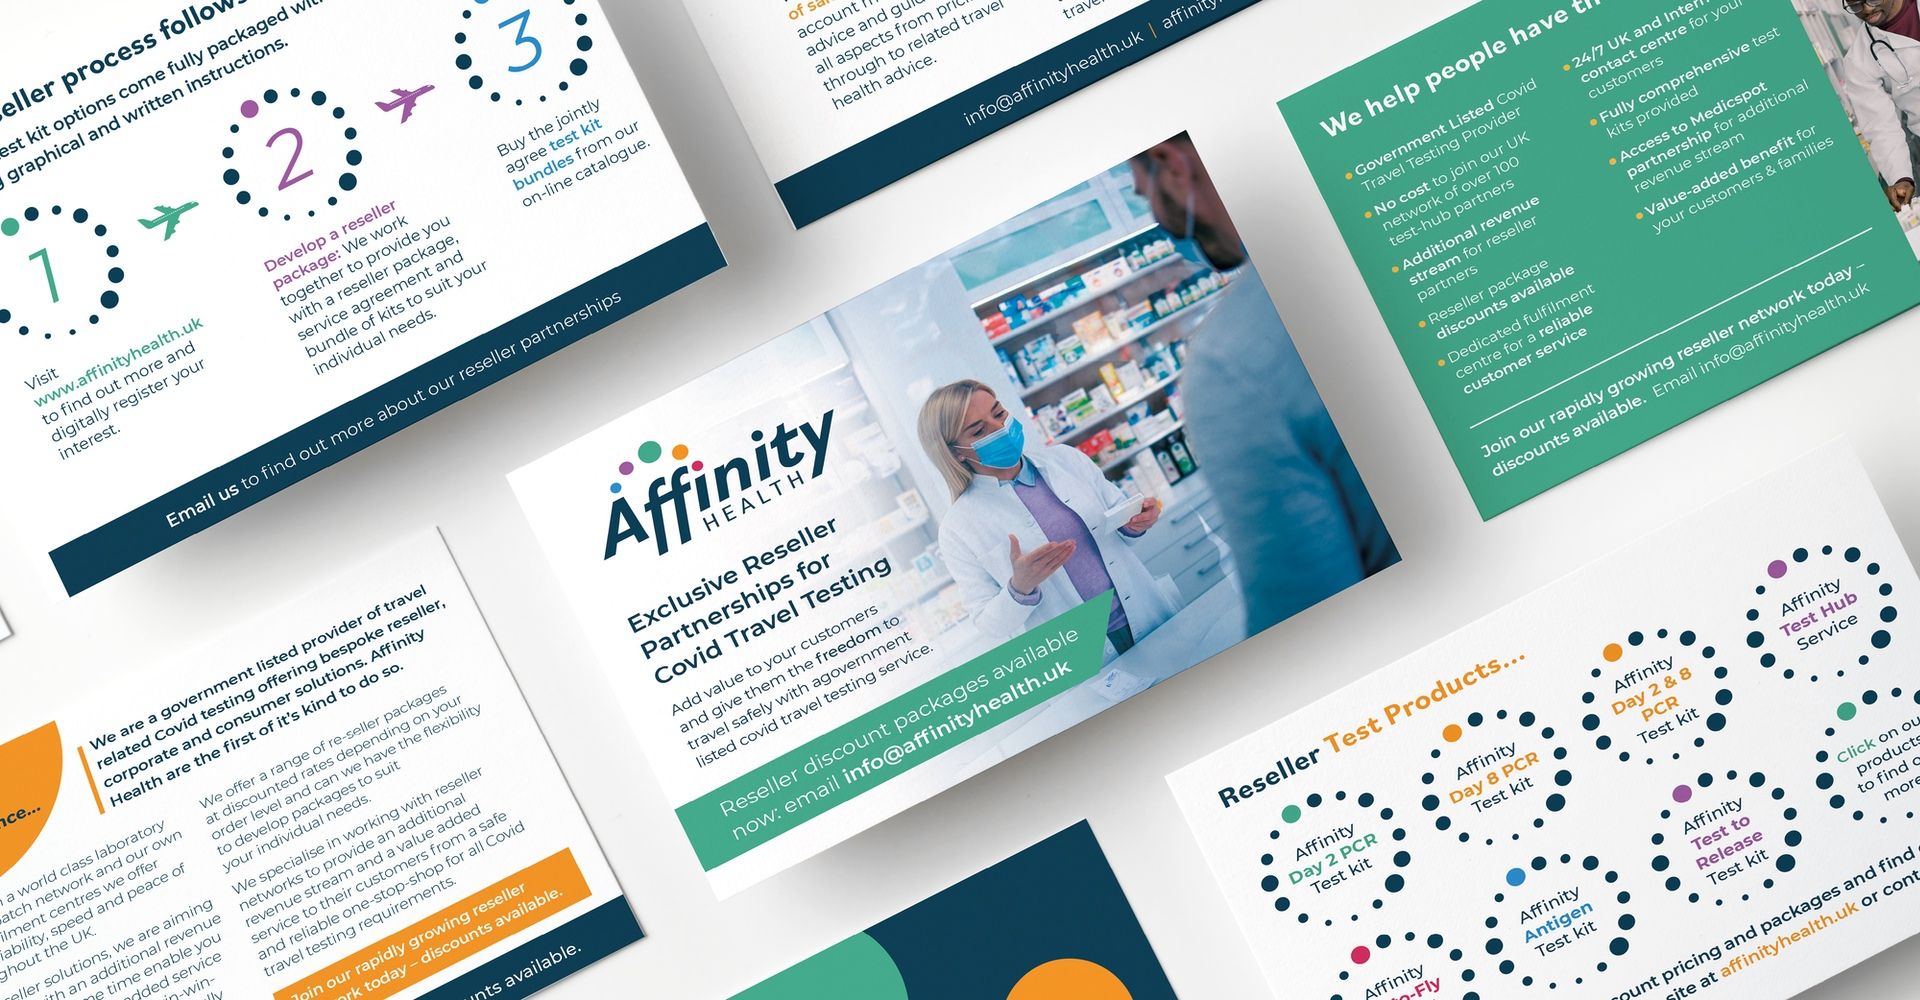 Collage of Affinity Health pages from brochure/website.